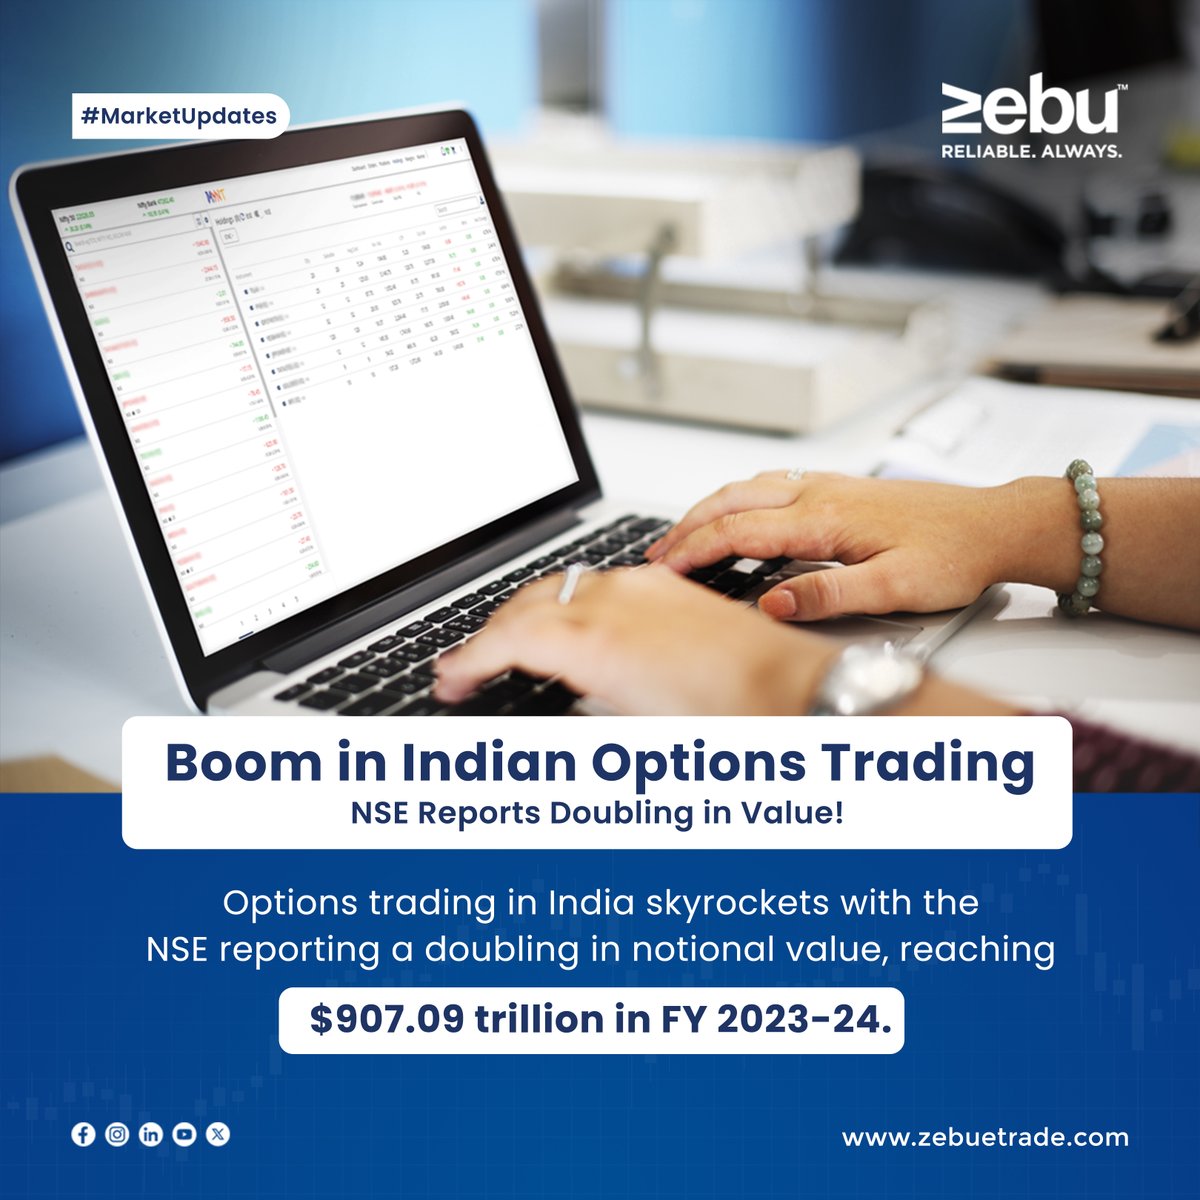 India's options trading surges, doubling in notional value to $907.09 trillion in FY 2023-24, reports NSE.

#OptionsTrading #NSE #FinancialMarkets #InvestingIndia #TradingNews #NSEUpdate  #simplifywithmynt #zebu